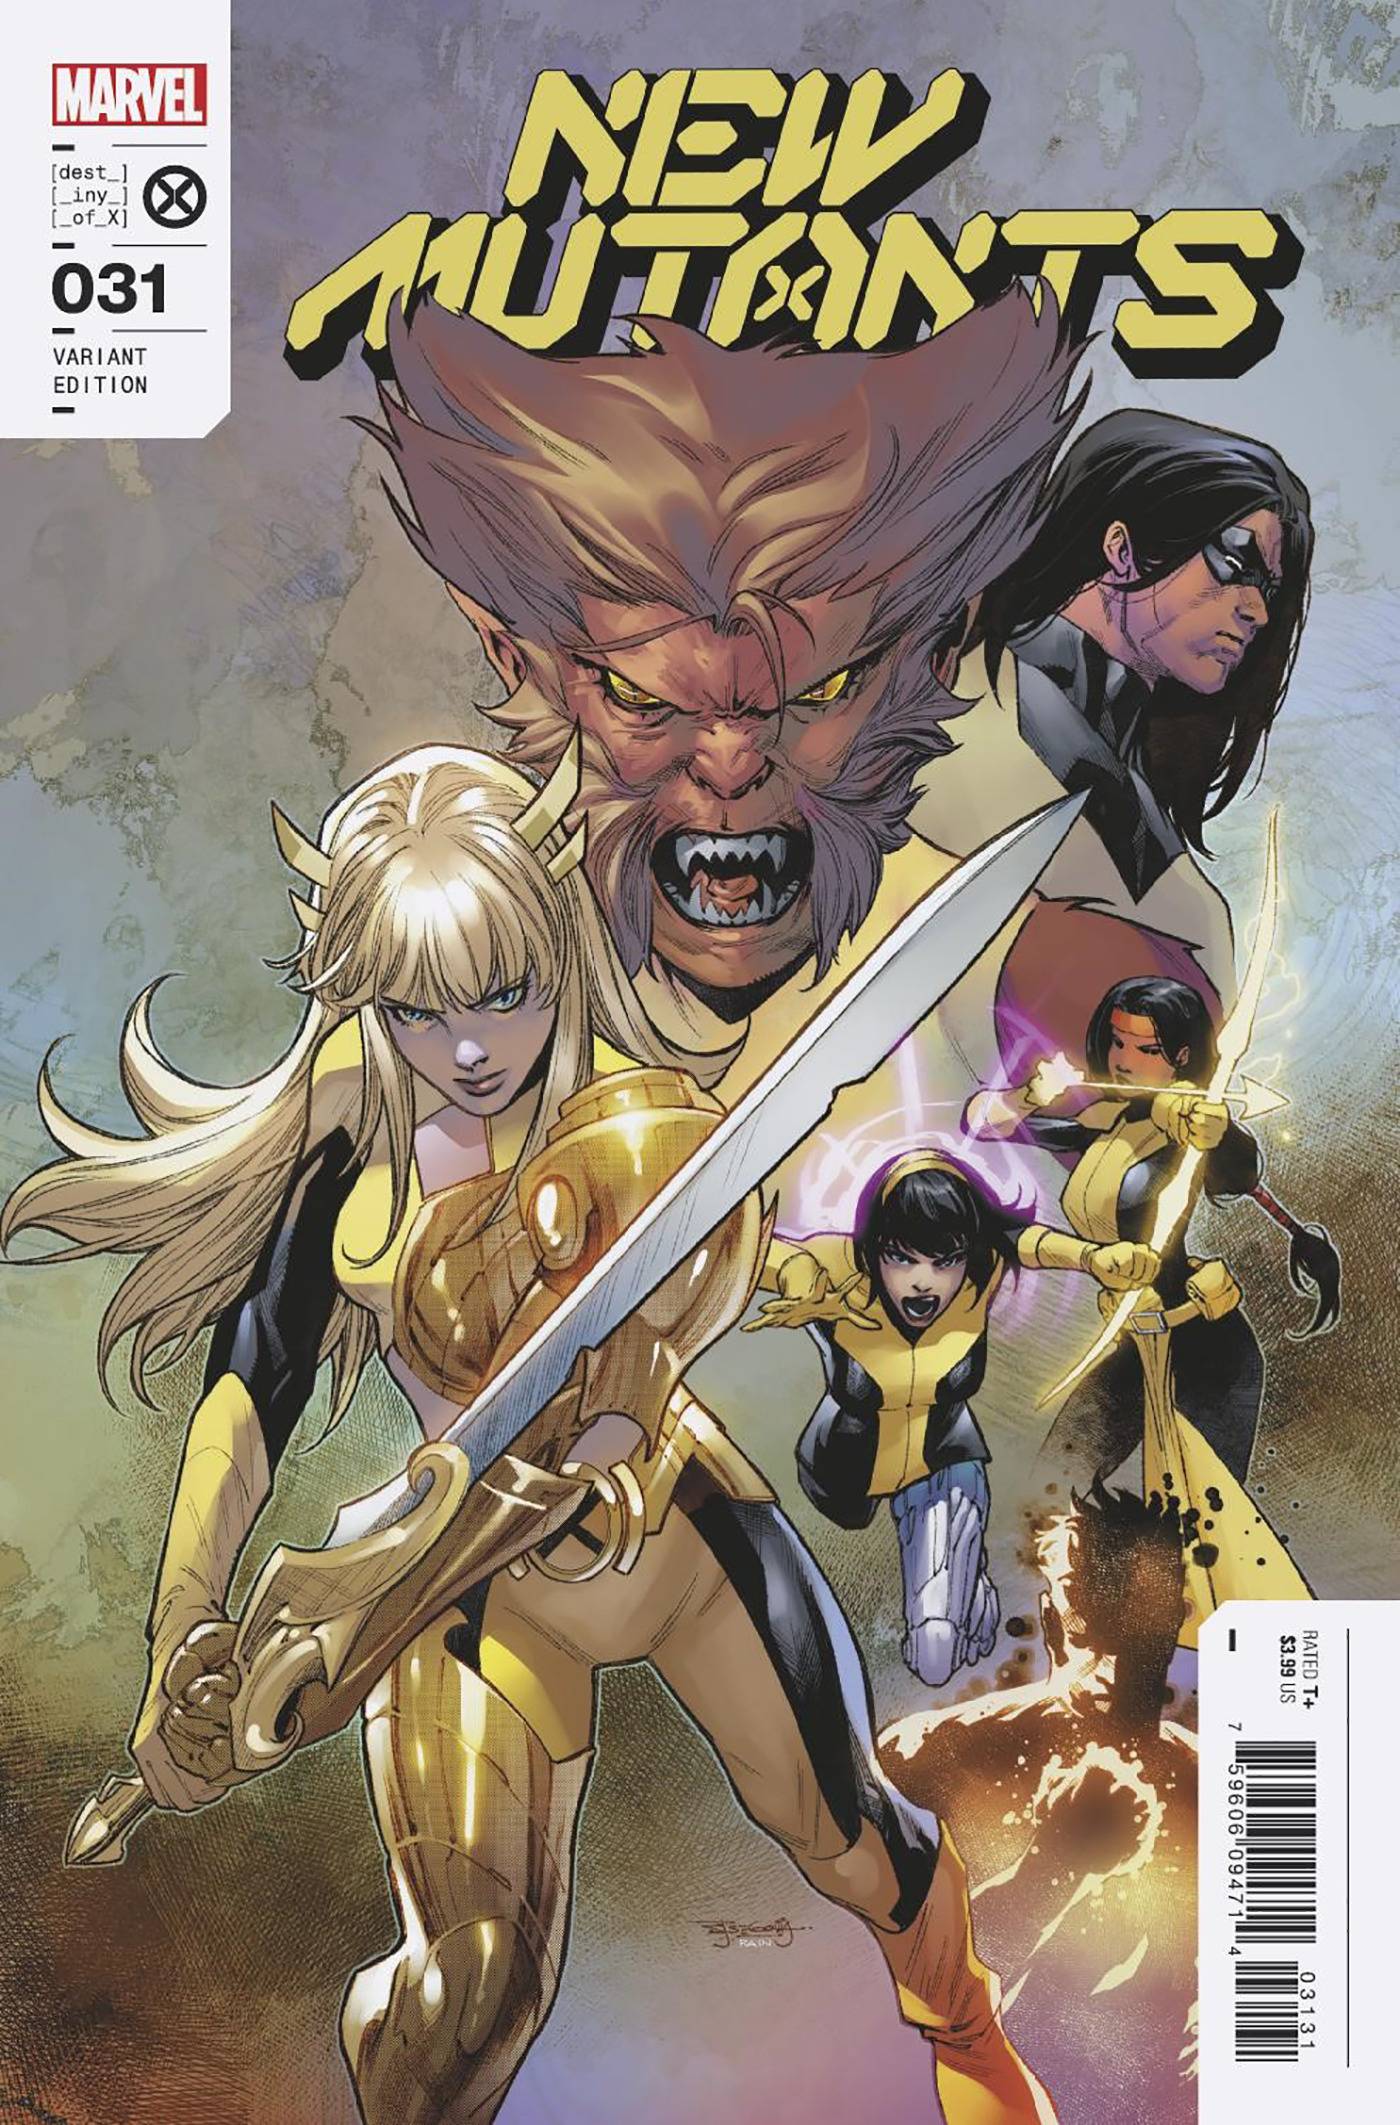 4 Reasons To Get Excited for Marvel's The New Mutants